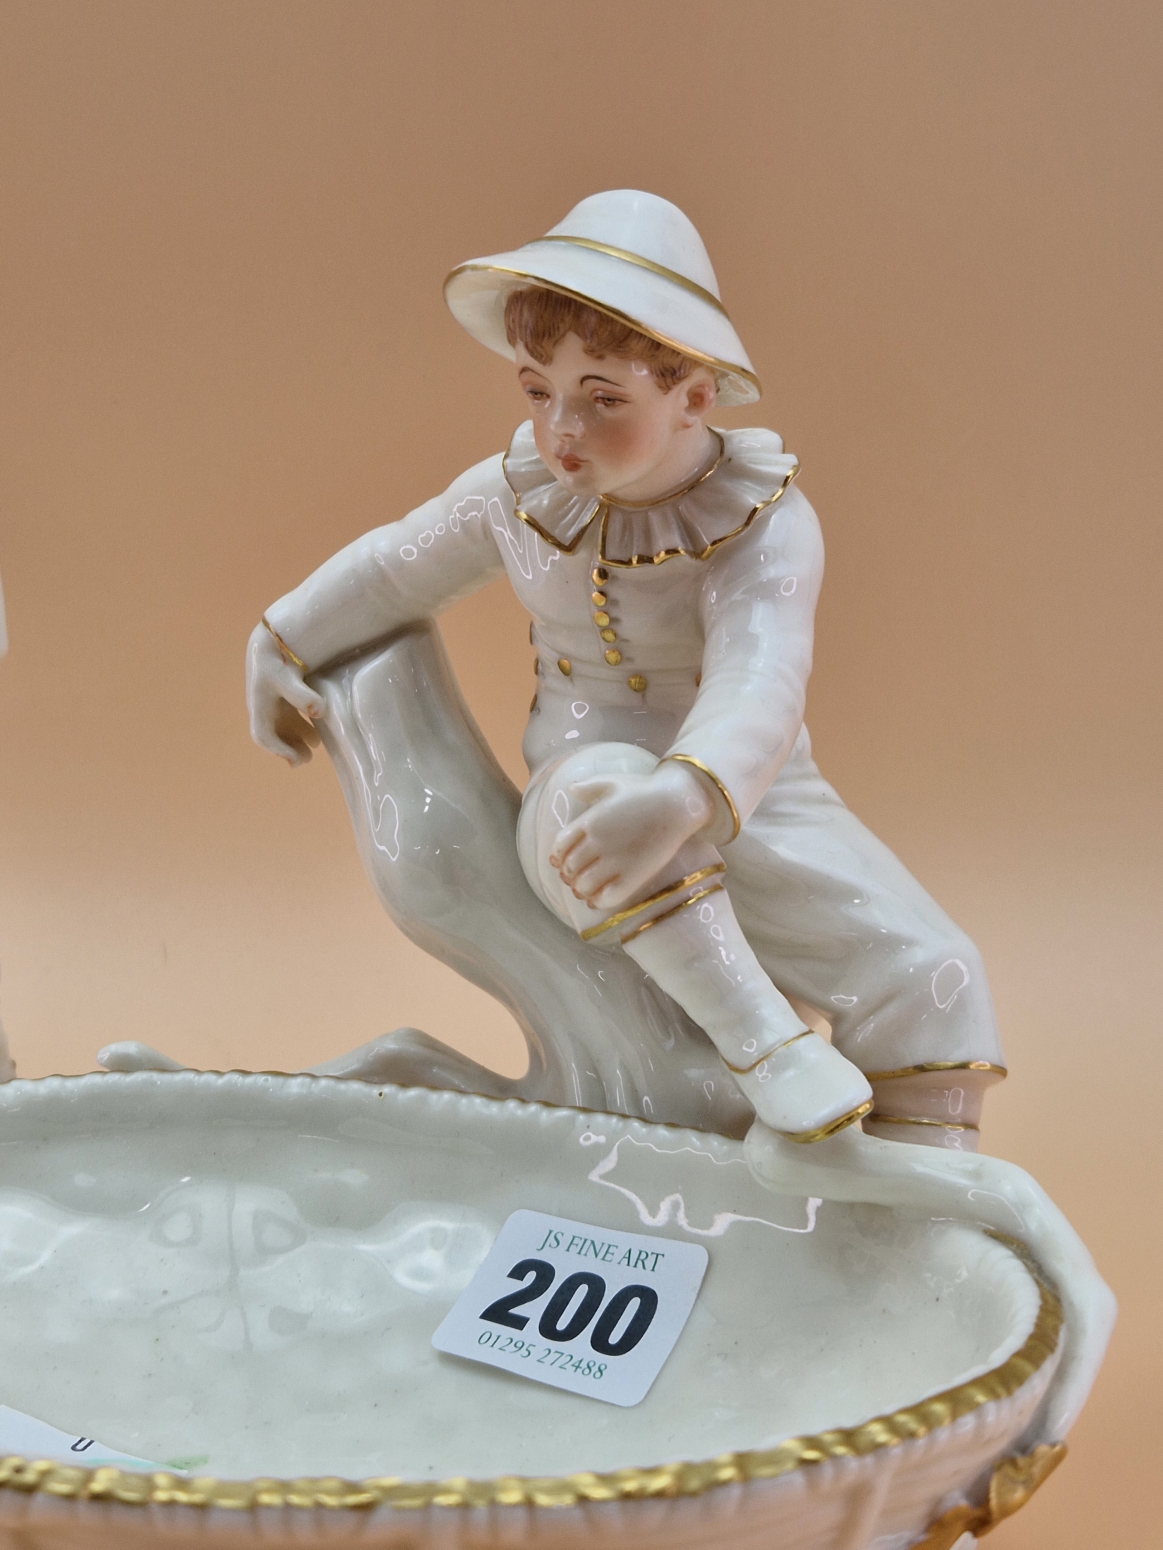 A VICTORIAN ROYAL WORCESTER FIGURE OF A BOY SEATED ON A BRANCH OVERLOOKING A GILT EDGED BASKET. W - Image 2 of 9